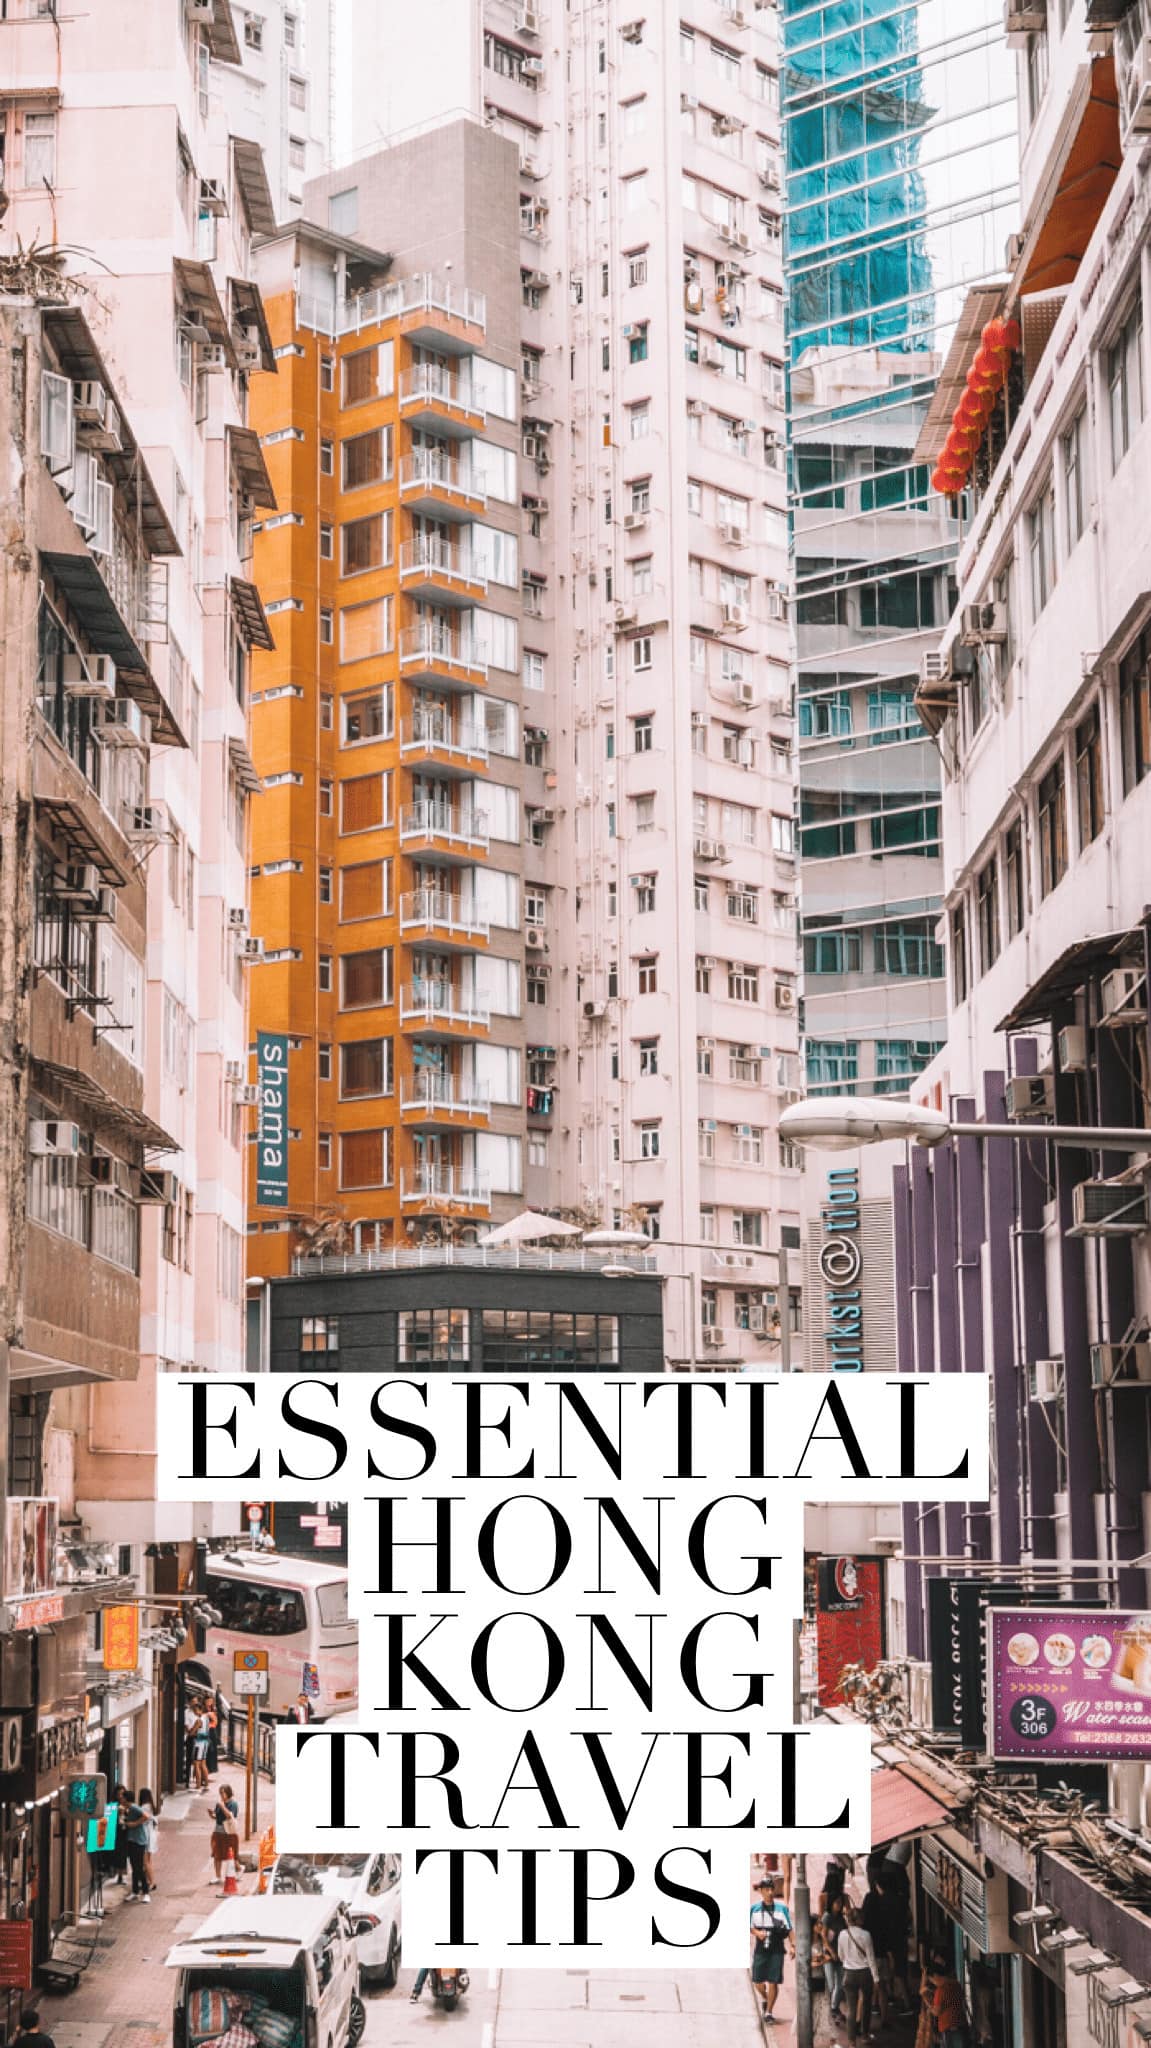 14 Tips For Traveling to Hong Kong For the First Time